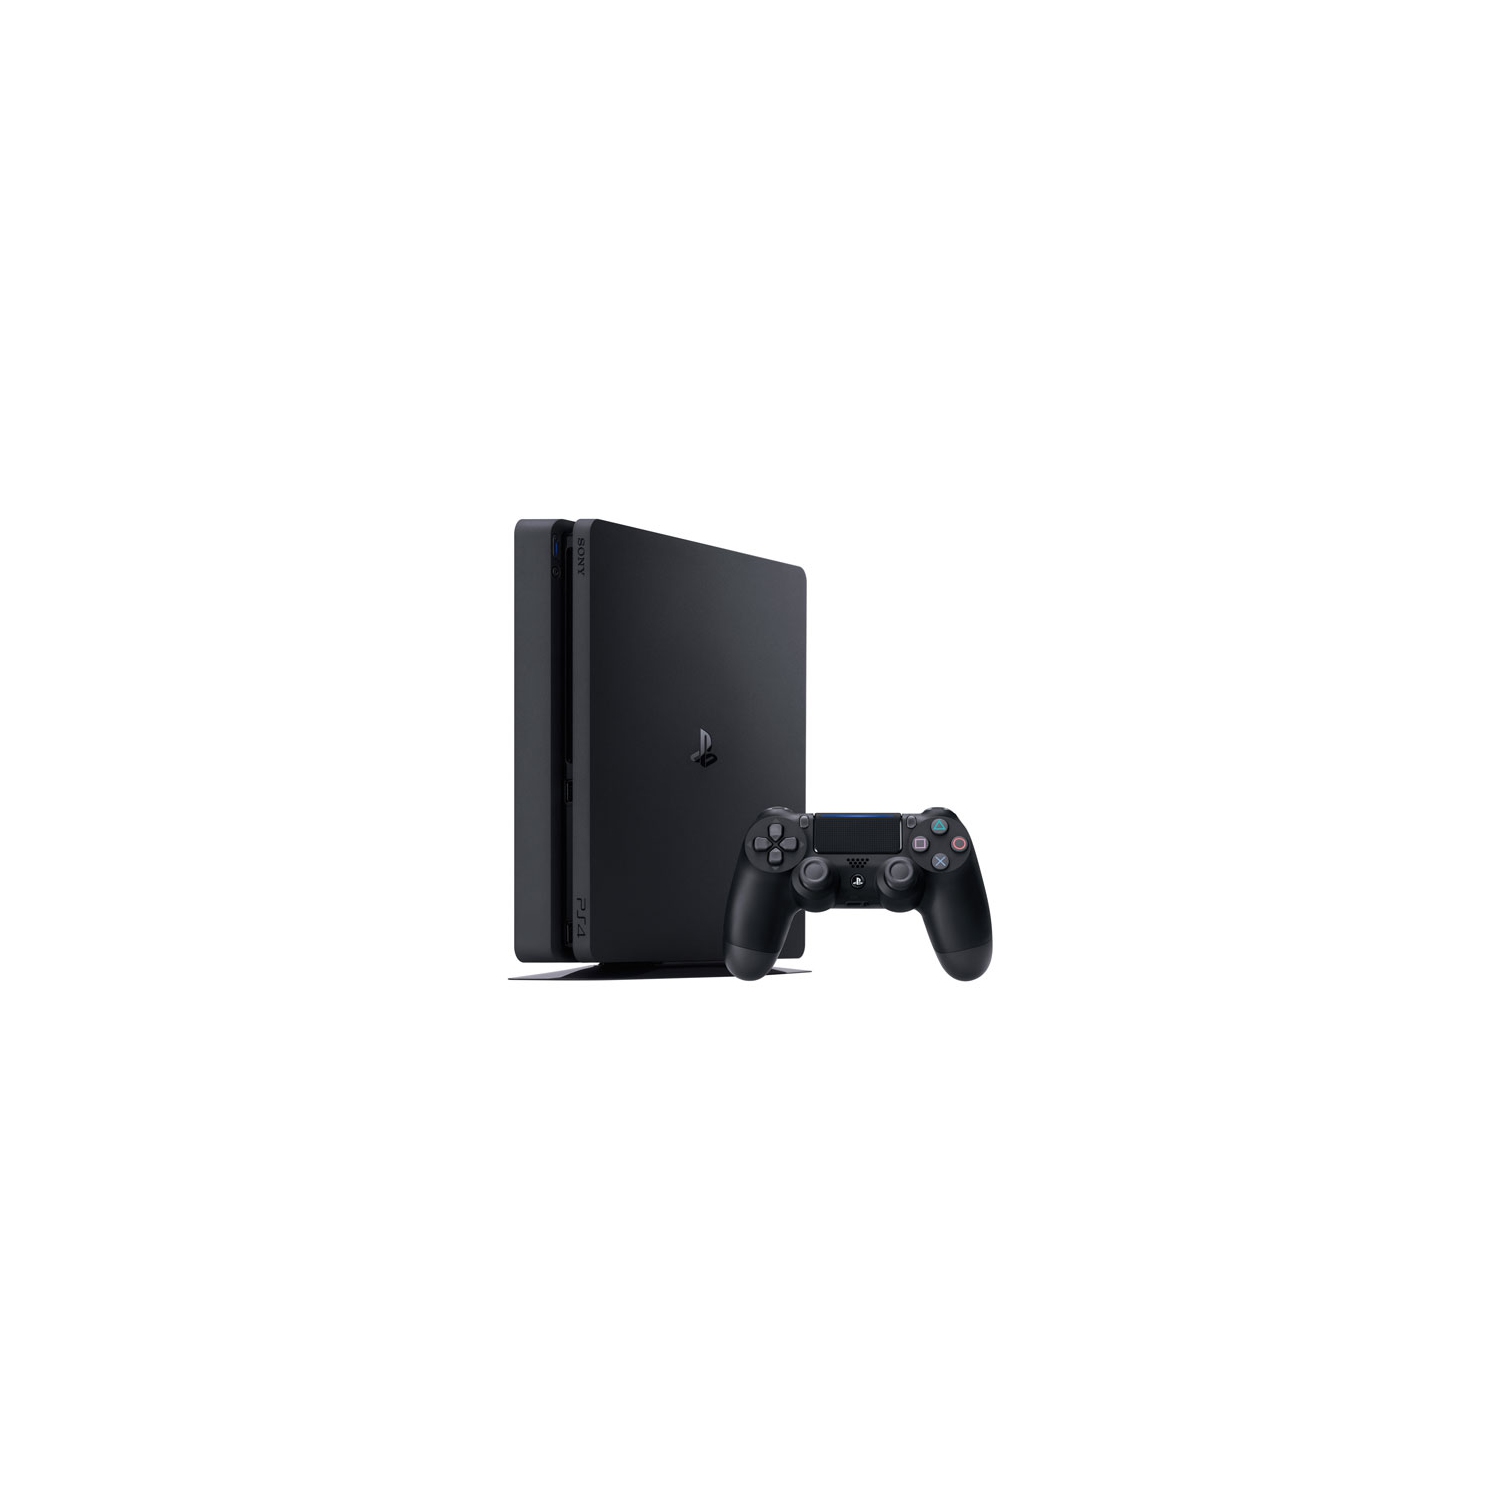 Refurbished (Excellent) - PlayStation 4 1TB Console